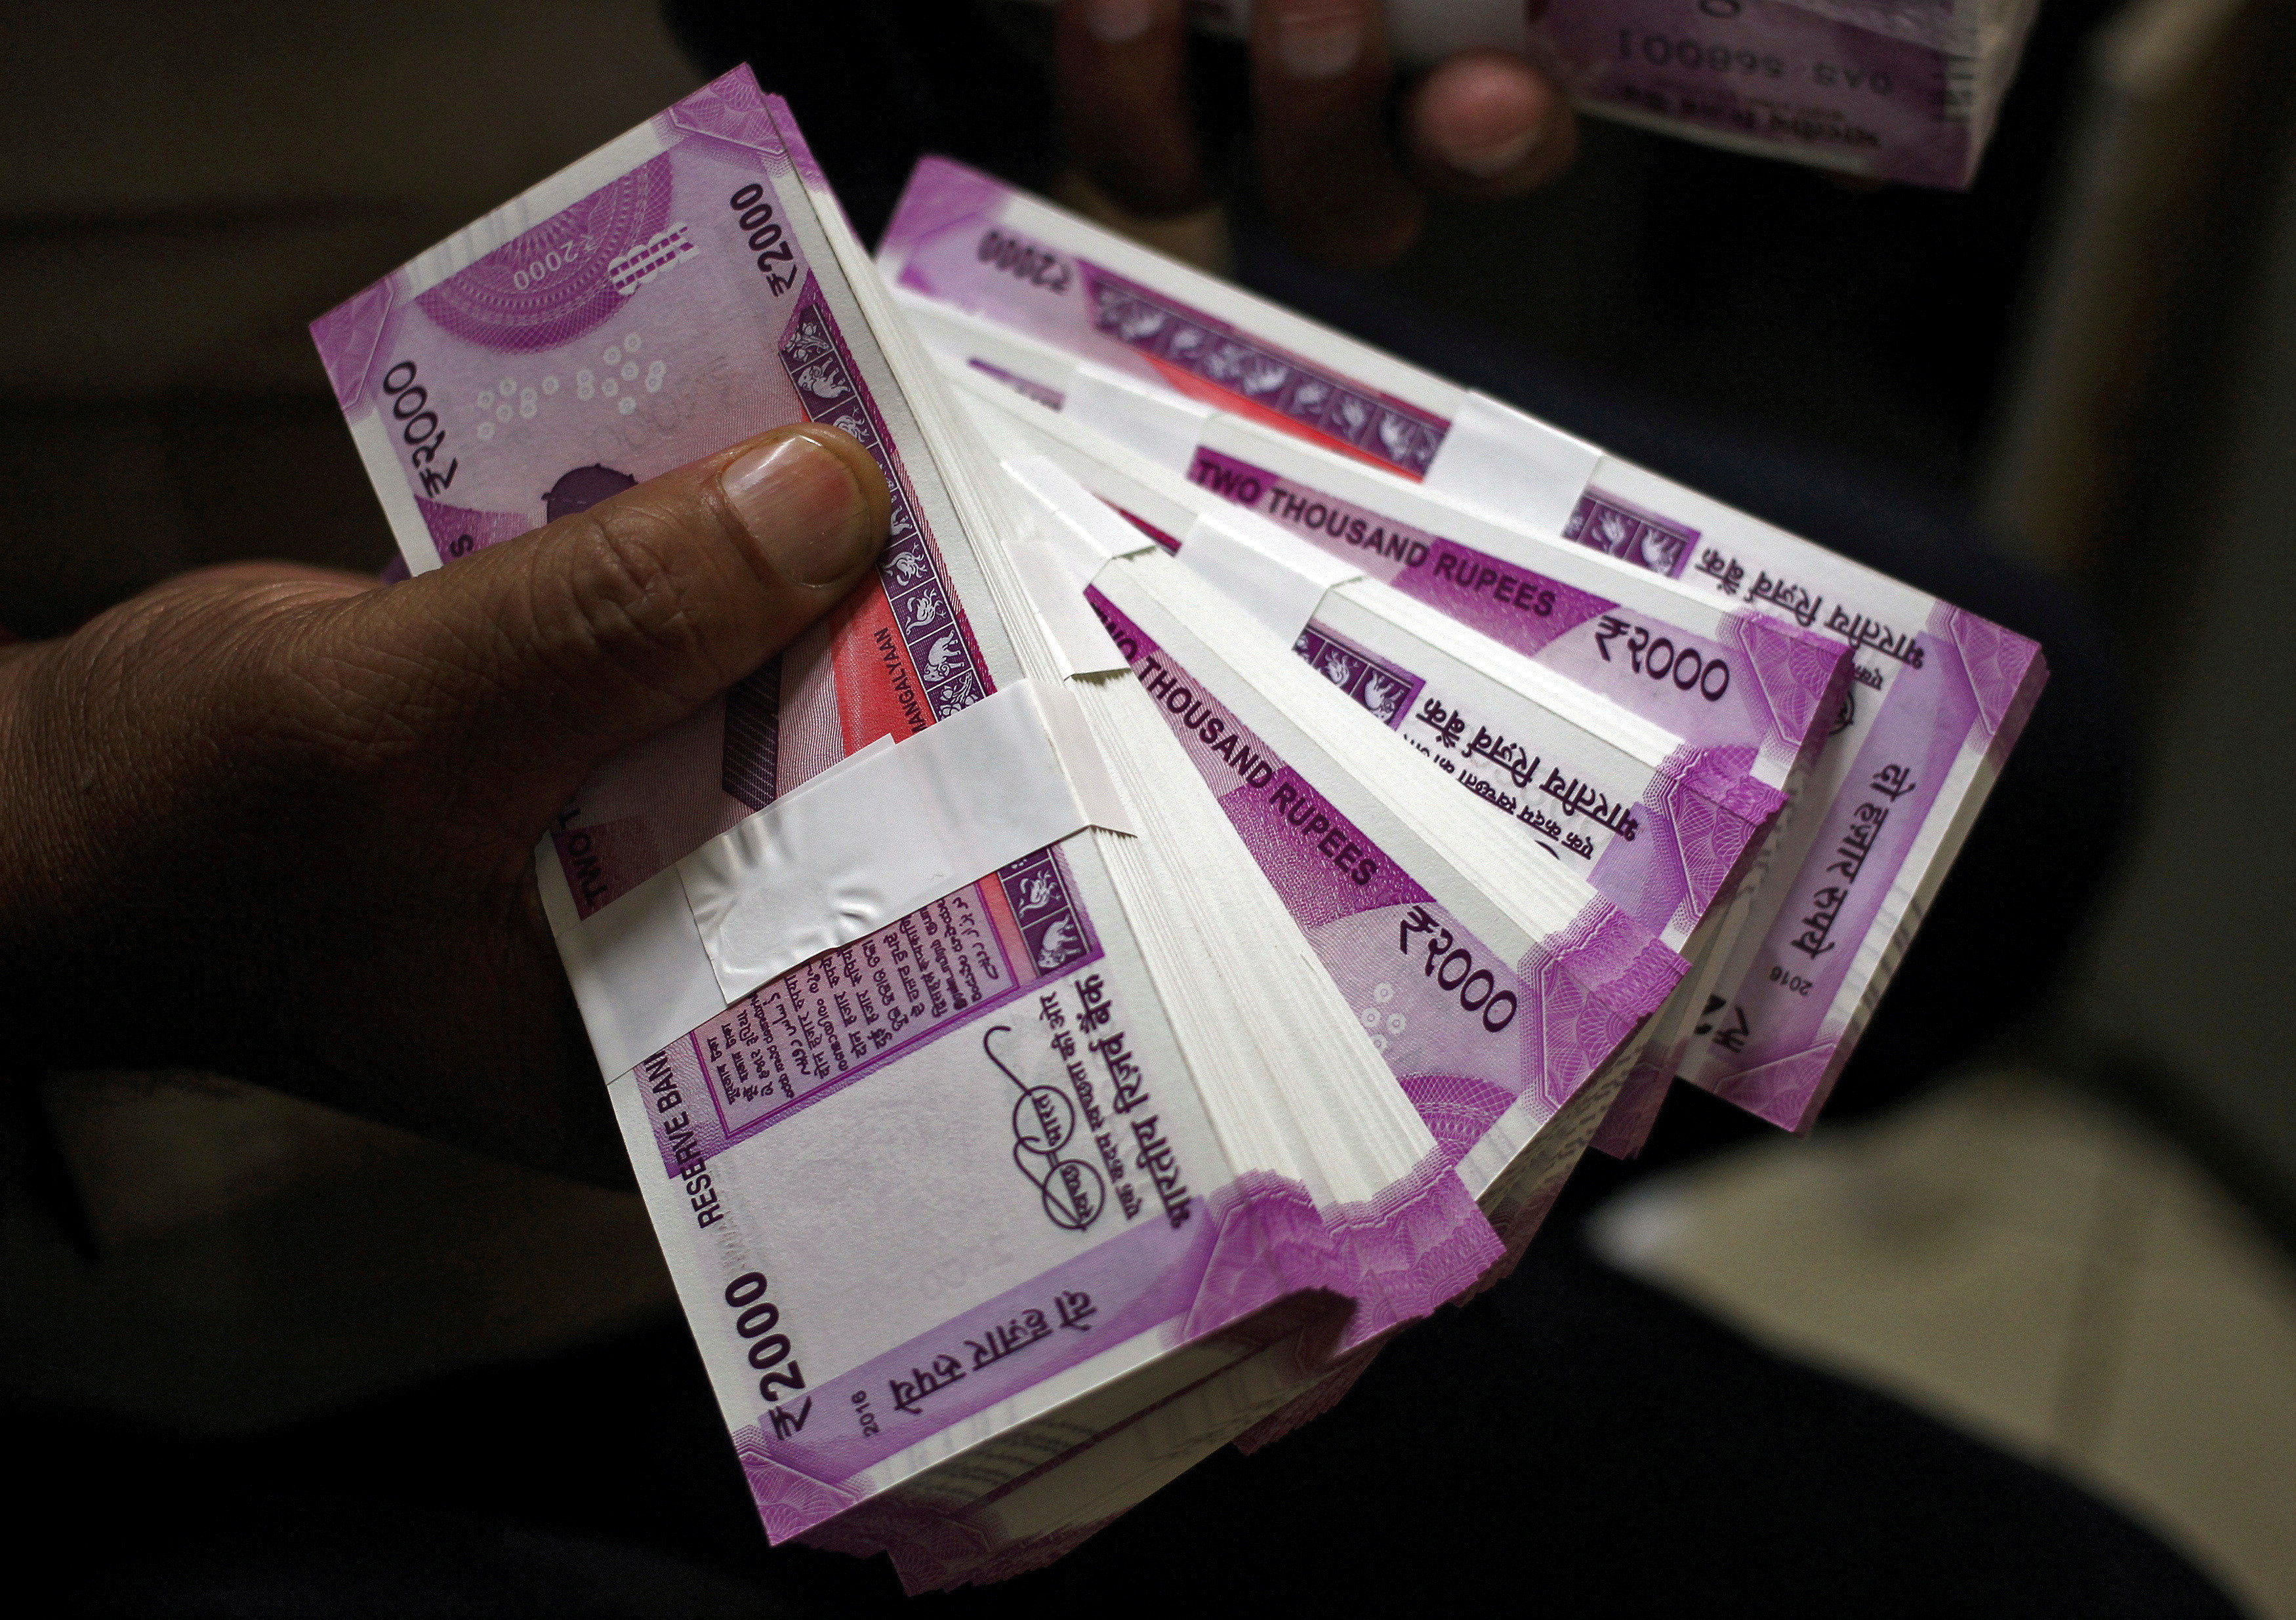 India to withdraw 2,000-rupee notes from circulation